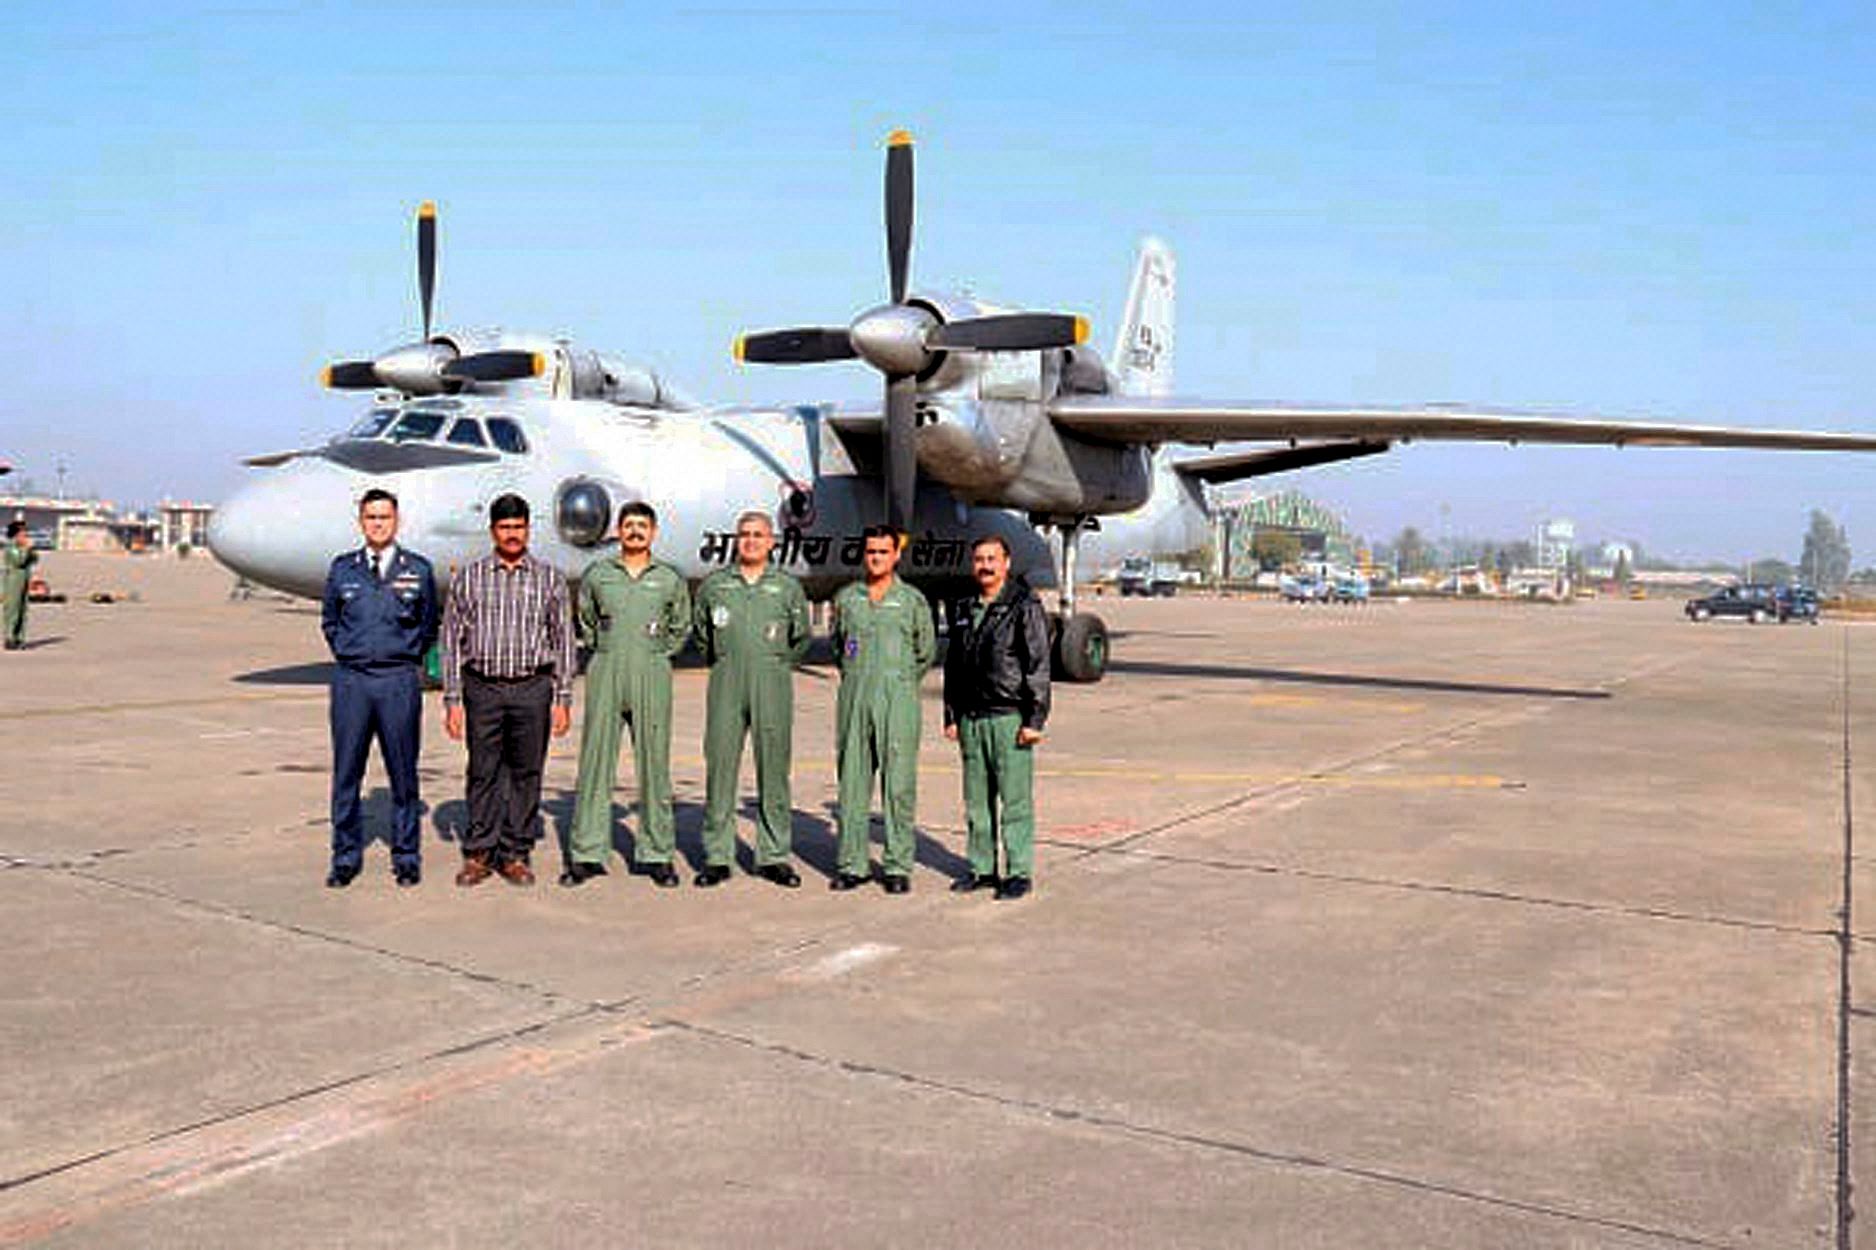  The Indian Air Force on Tuesday set a new record as its planes airlifted 463 tonnes of the load from its airbase in Chandigarh to the airfields and remote drop zones